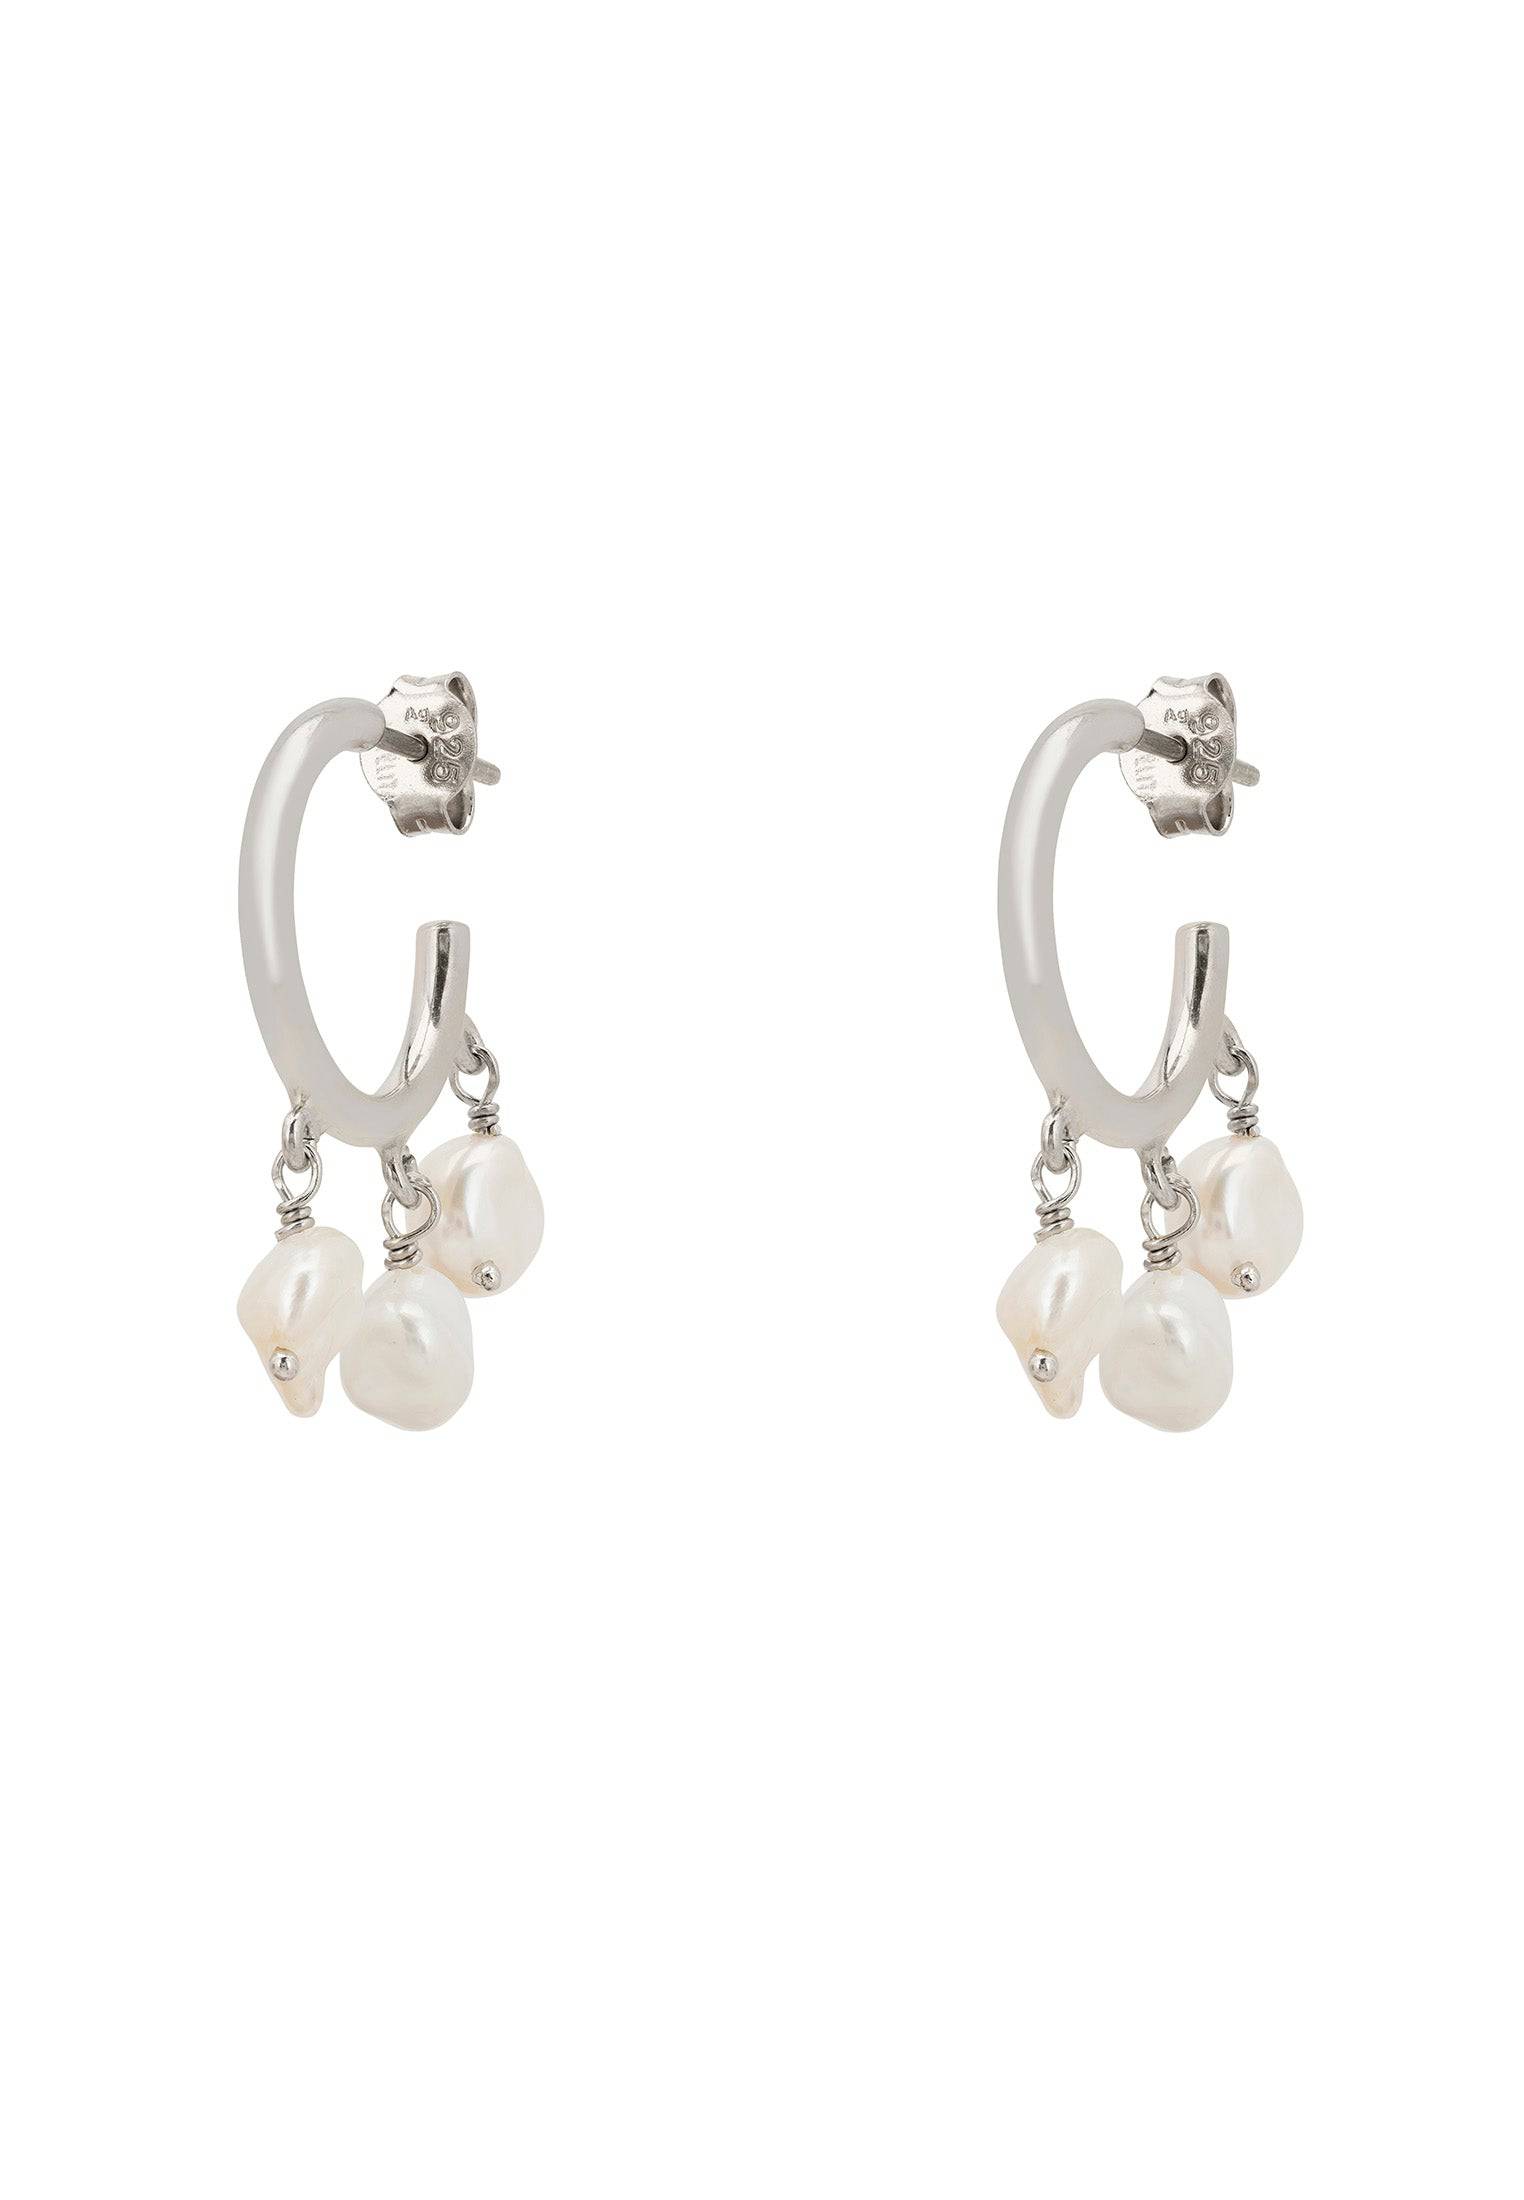 White Pearl Cluster Hoop Earrings in Sterling Silver - Elegant and Versatile Jewelry for Weddings and Gifts - Jewelry & Watches - Bijou Her -  -  - 